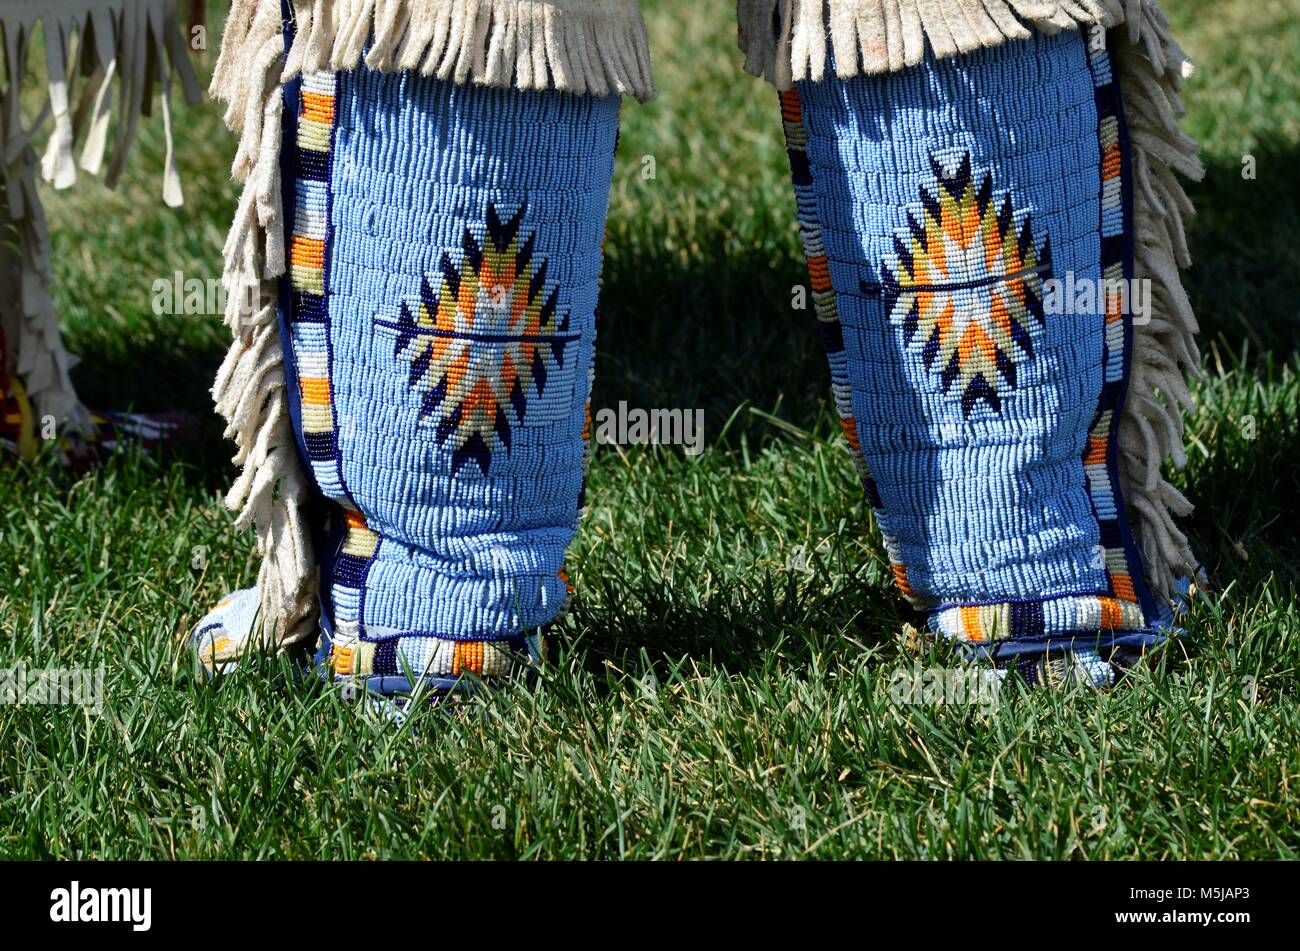 Aboriginal women during a dance competition, with their amazing hand made moccasins and colorful bead work. Stock Photo